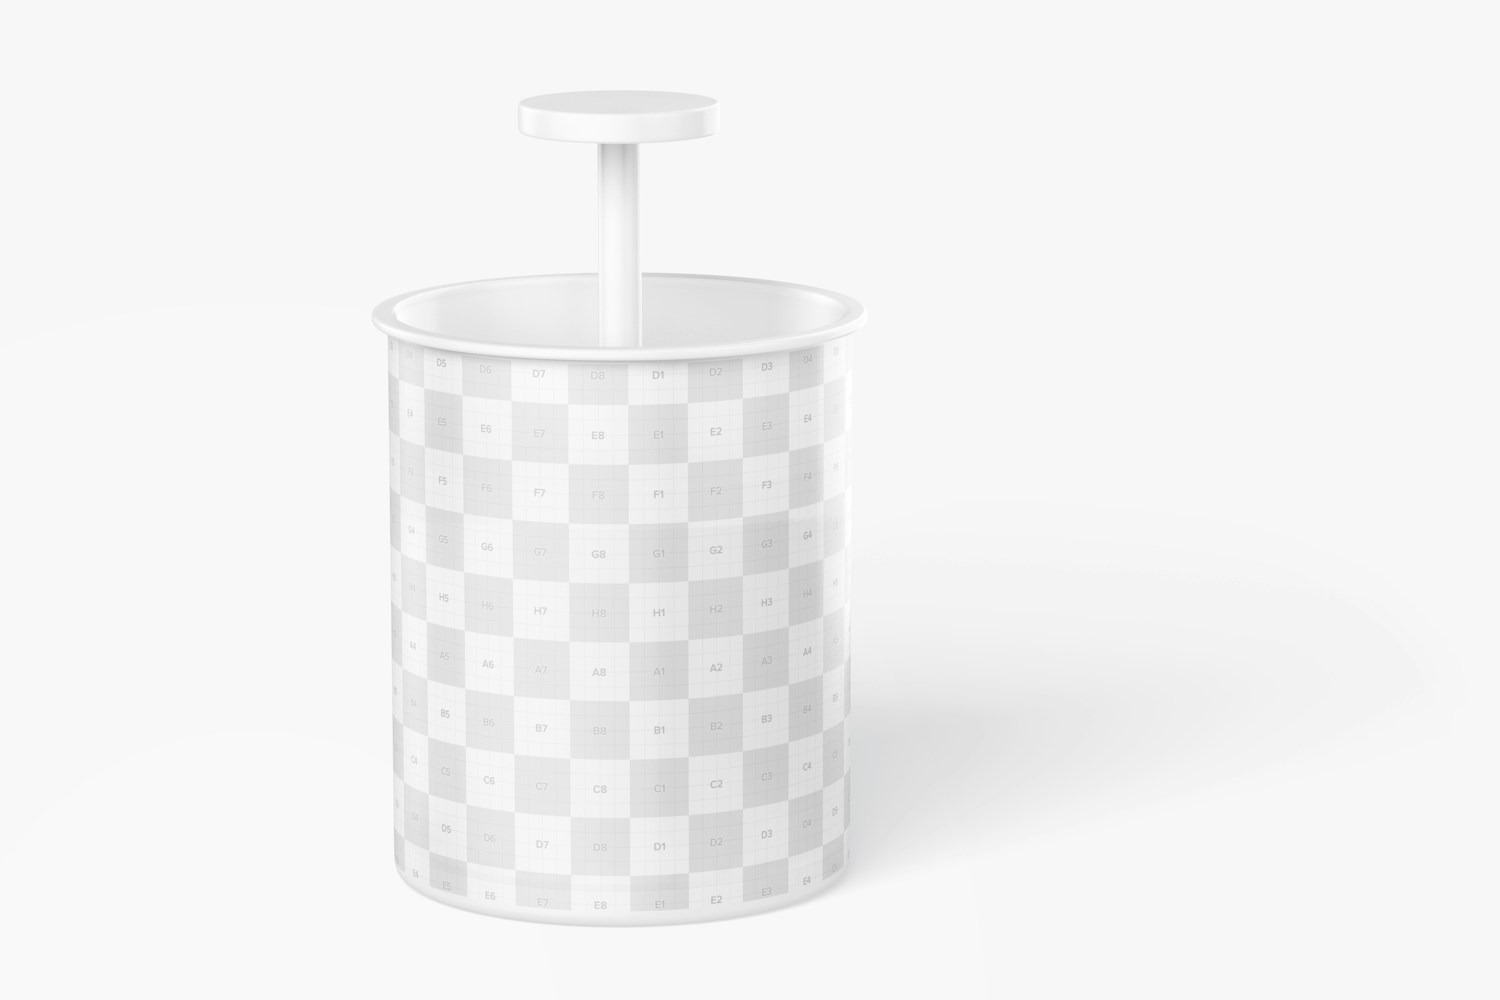 Foam Maker Cup Mockup, Front View